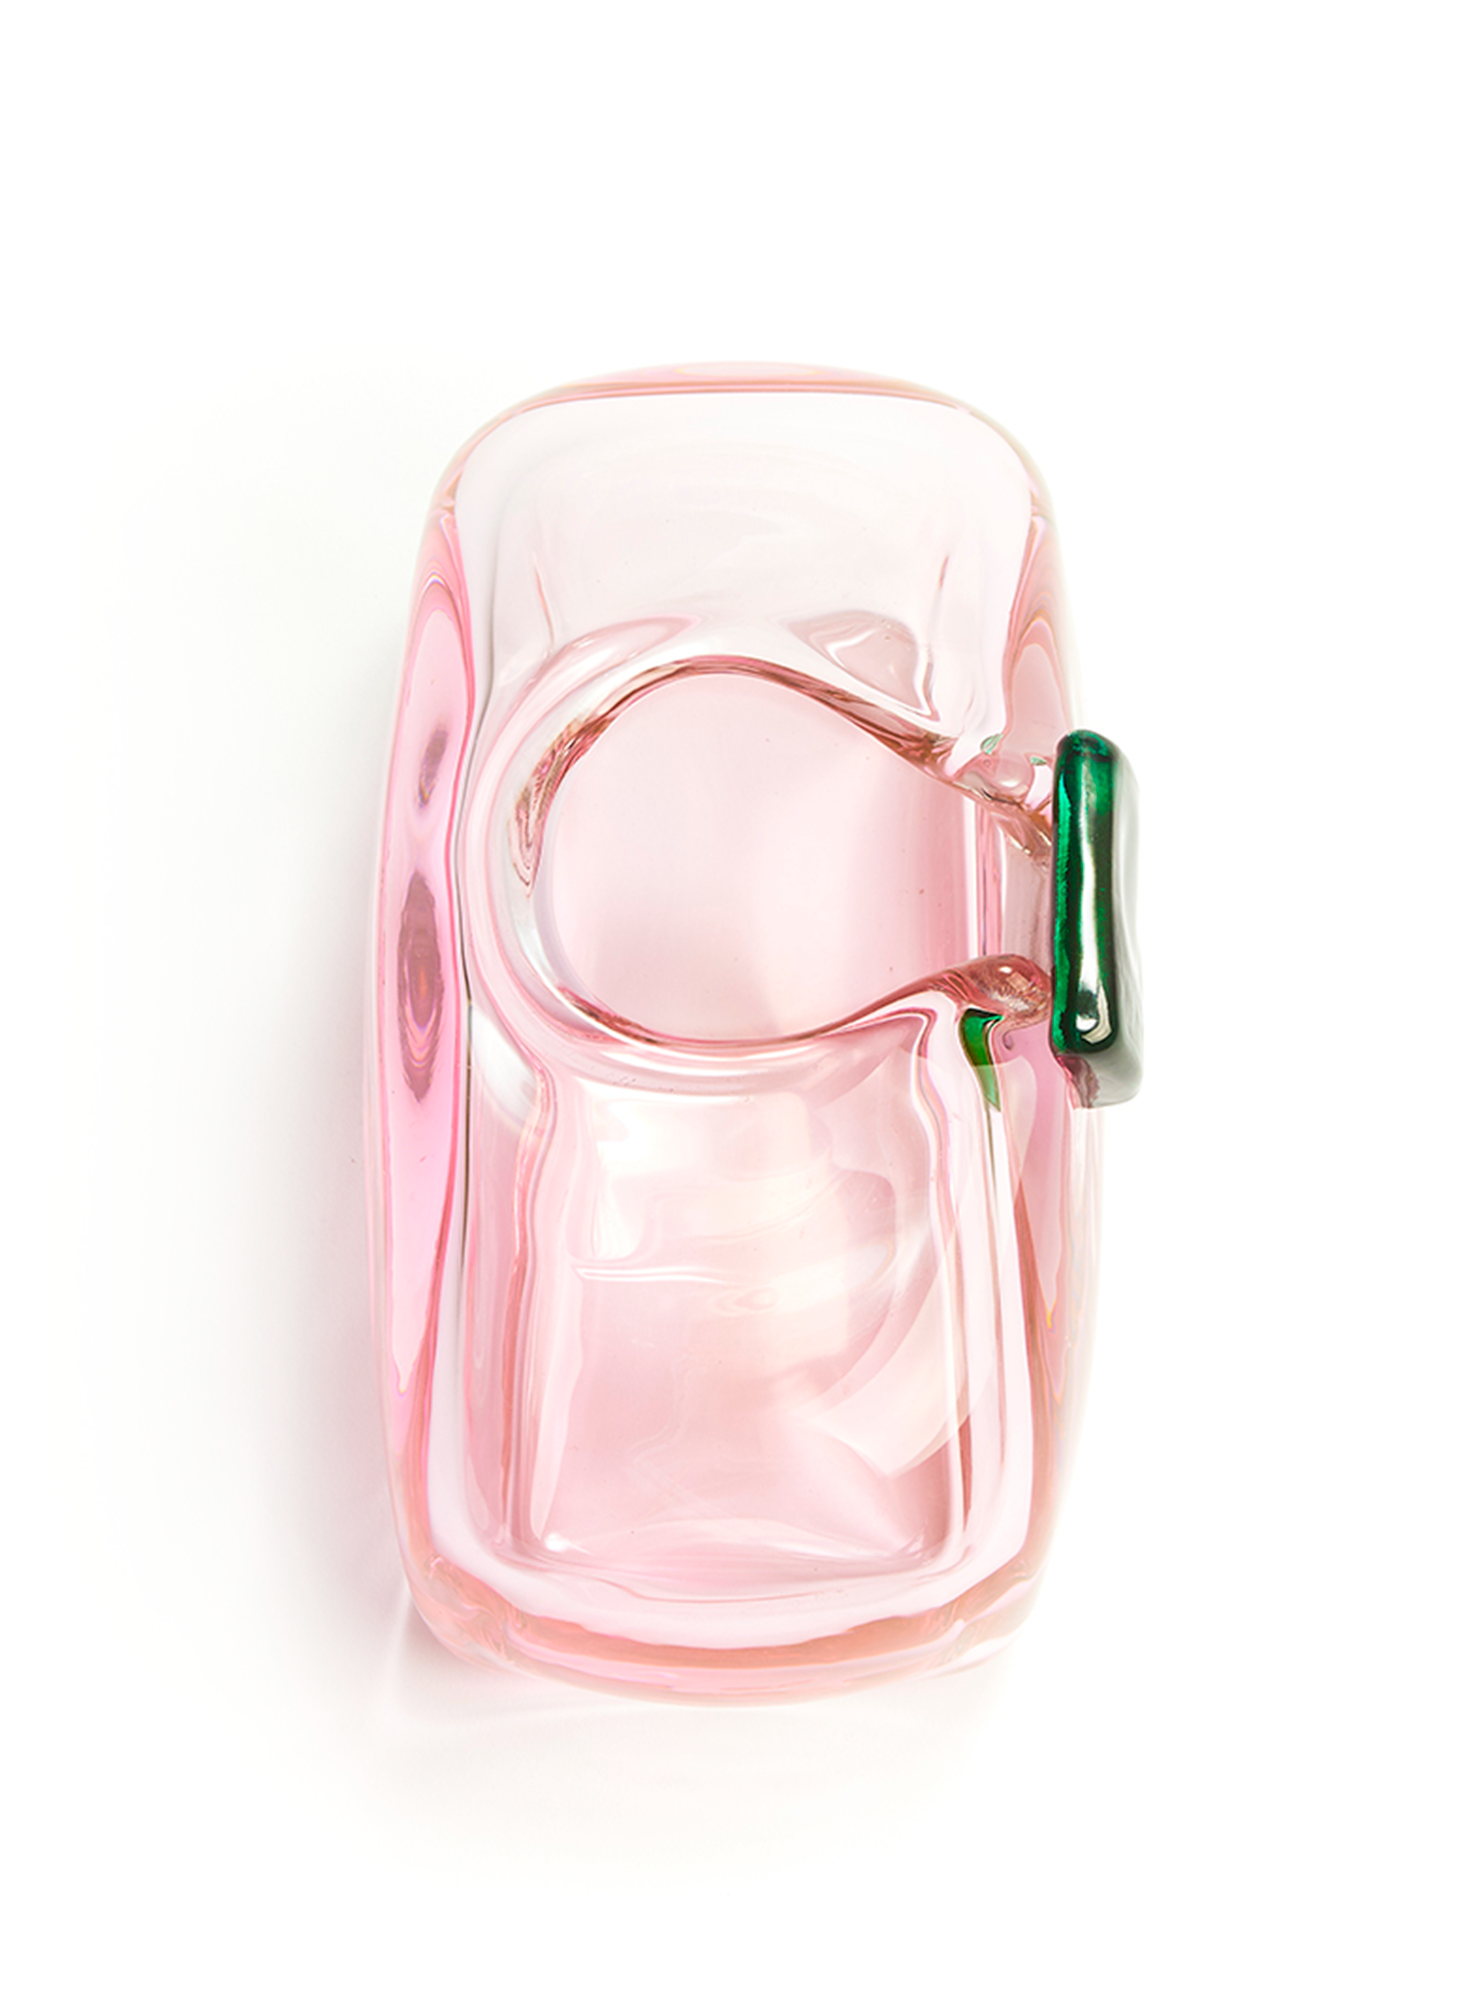 top view of a handmade rectangular glass object in a light pink color with a dark green detail